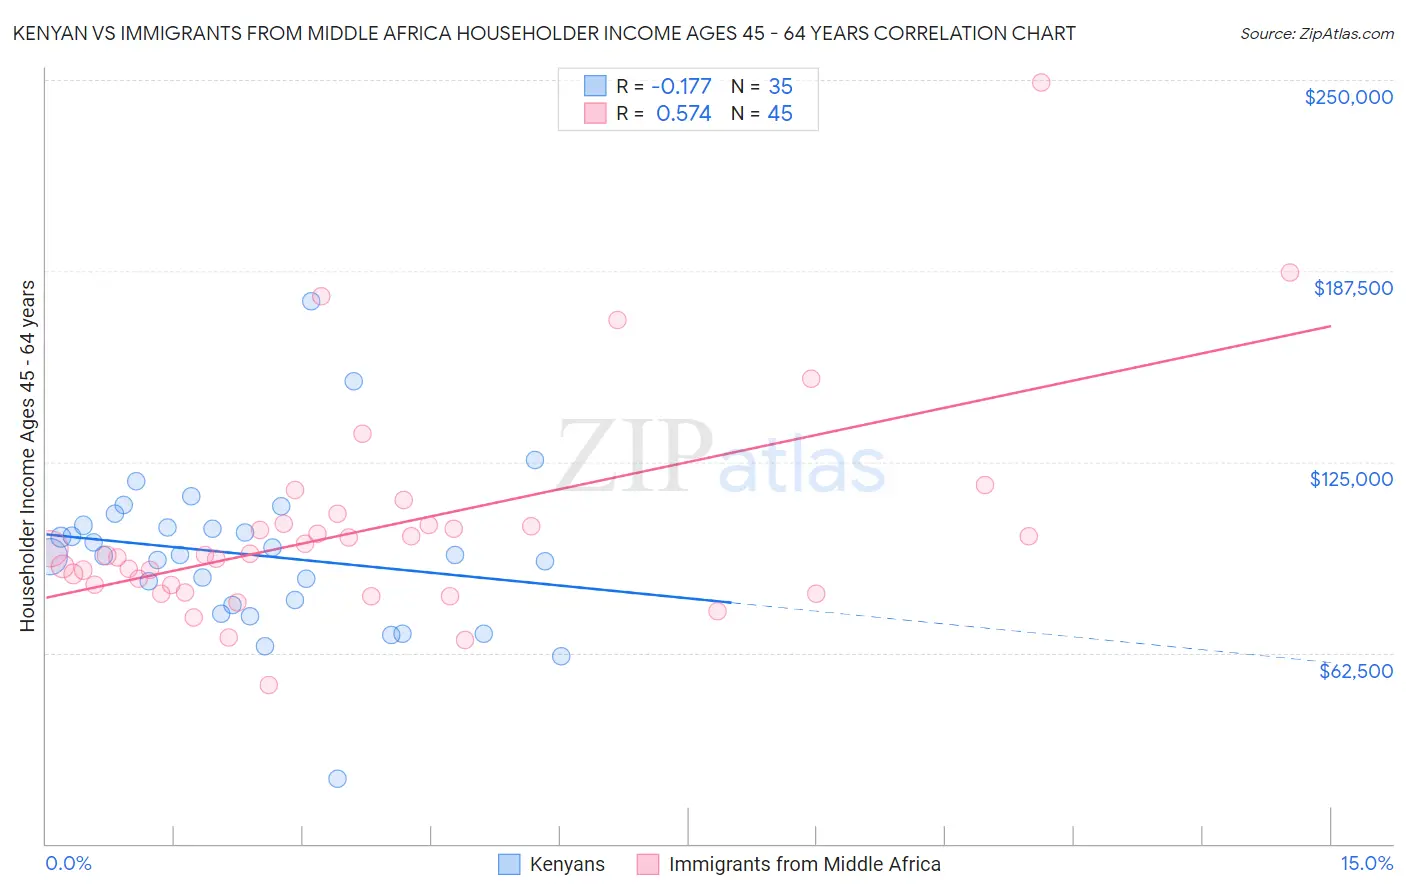 Kenyan vs Immigrants from Middle Africa Householder Income Ages 45 - 64 years